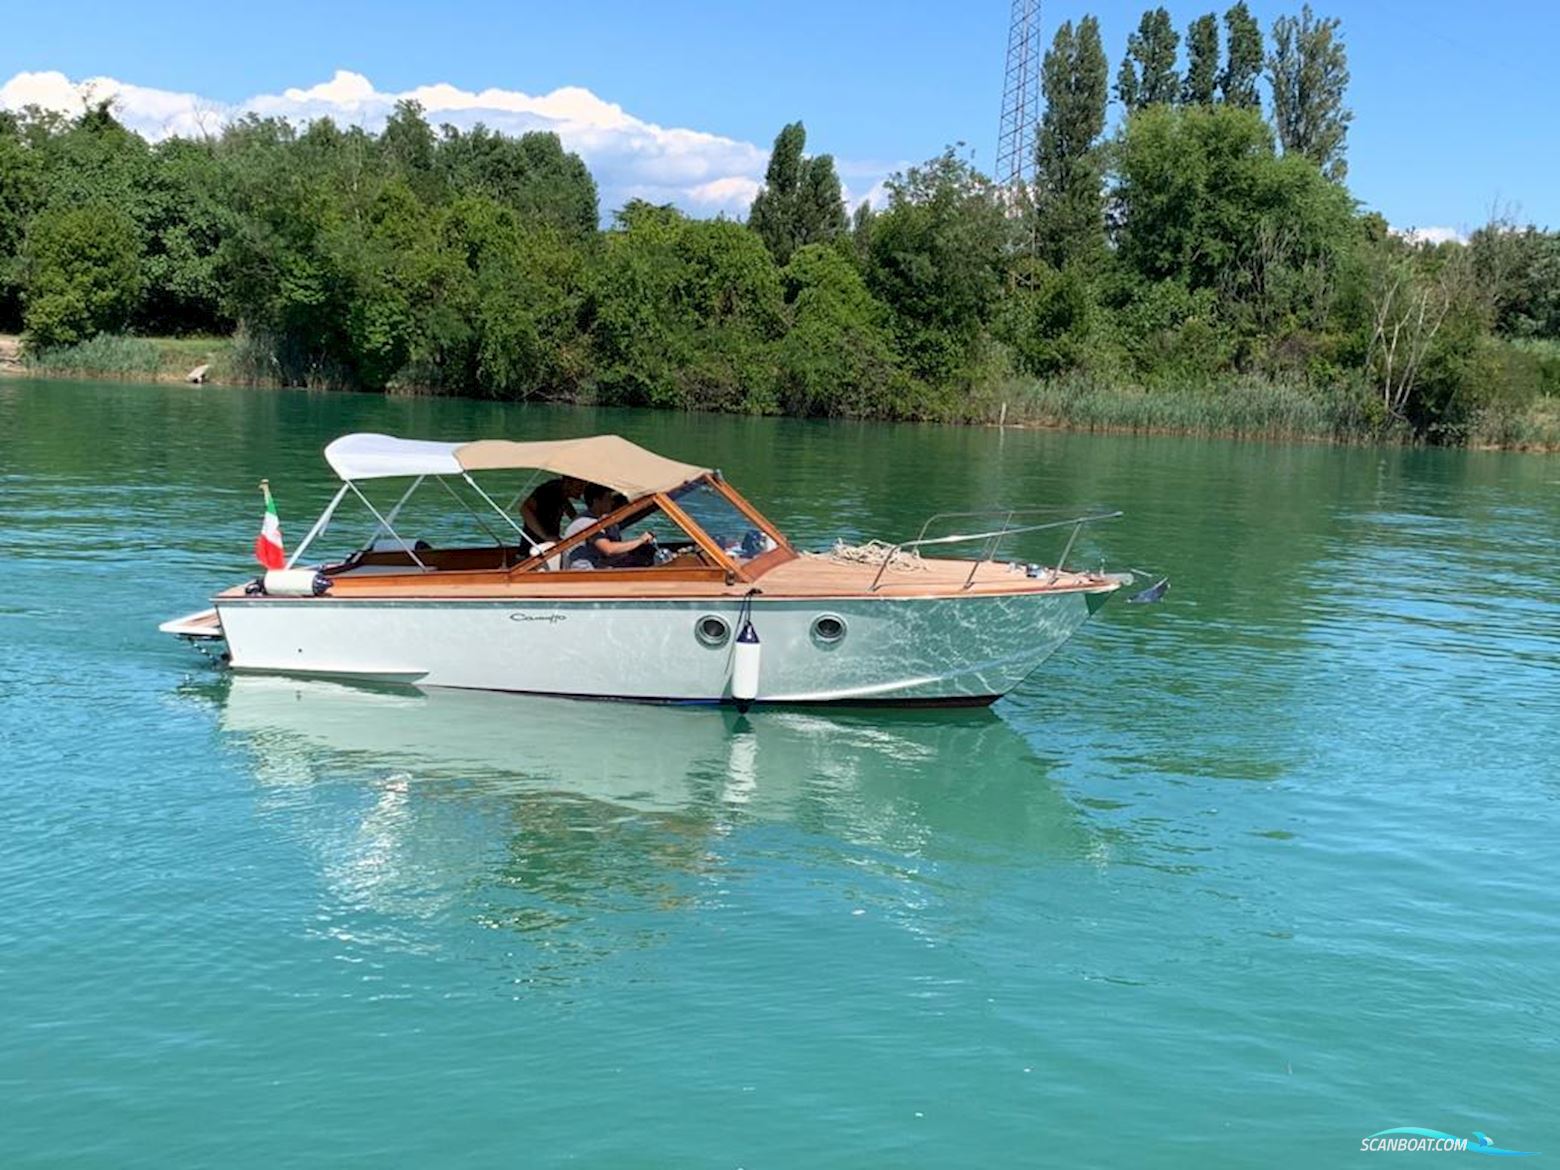 Camuffo C4 Motor boat 1968, with Mercruiser engine, Italy